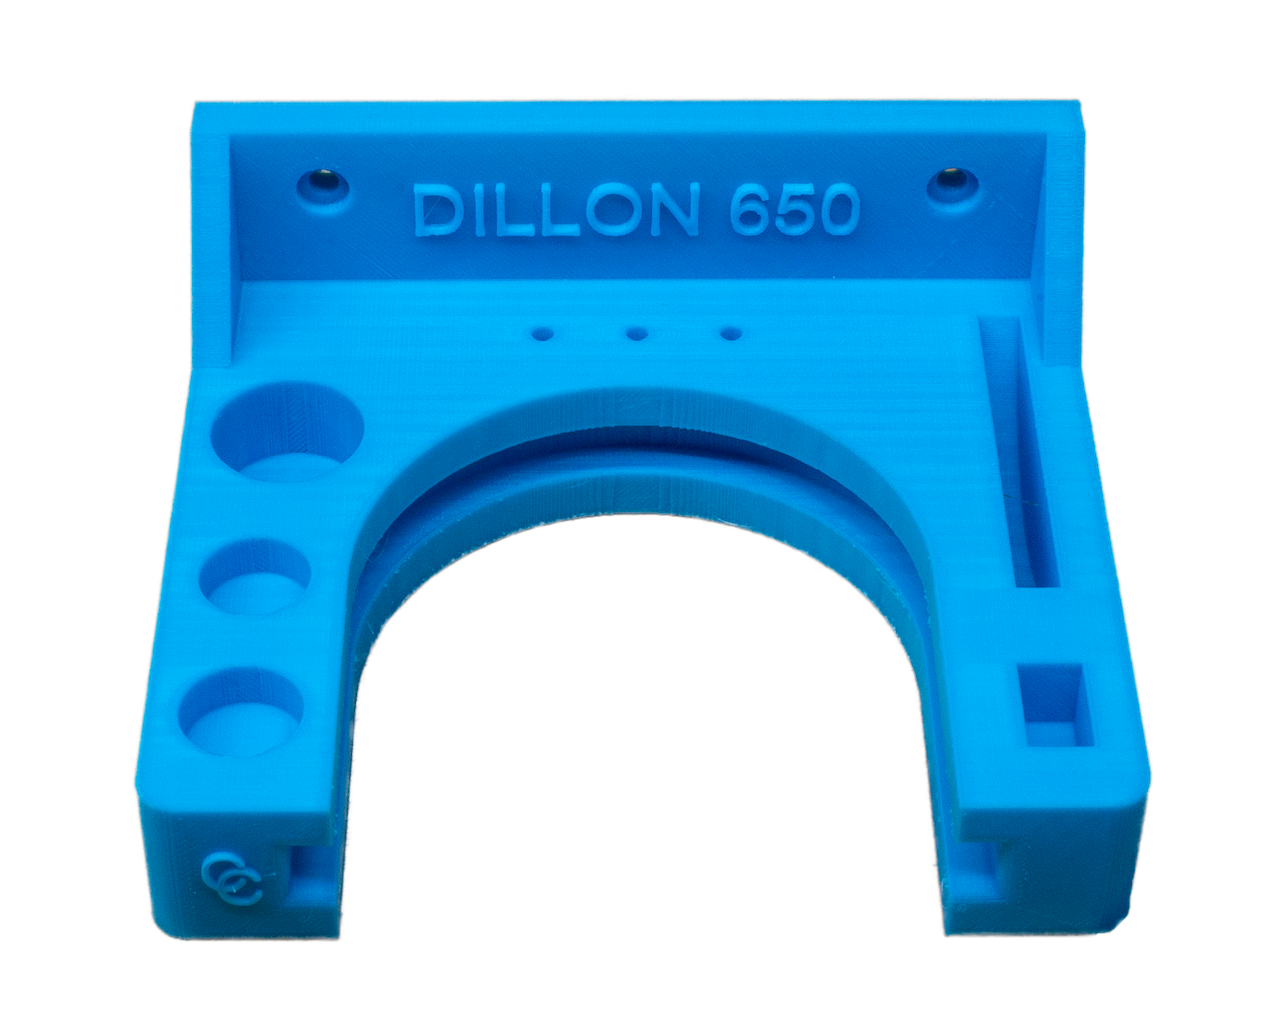 Dillon XL650-750 Style tool head Billet Aluminum CNC Made and holder (Bundle)